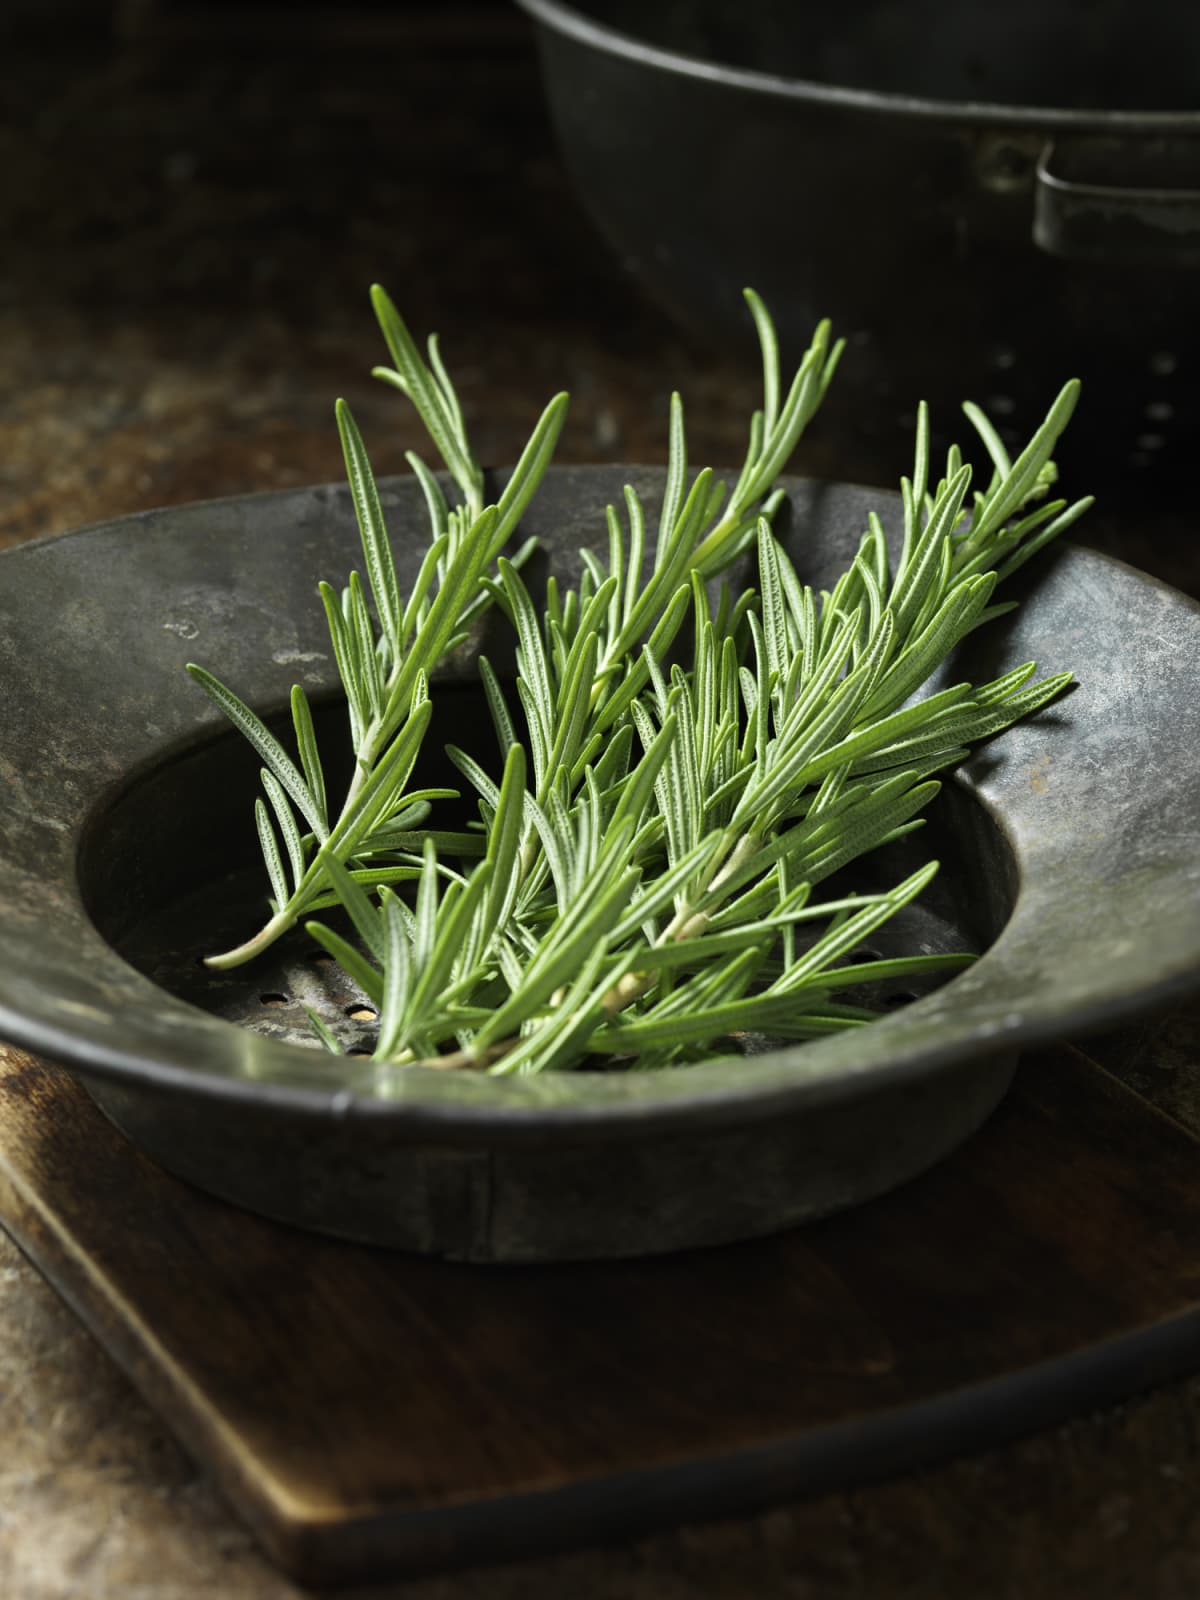 Rosemary sprigs in a black bowl 